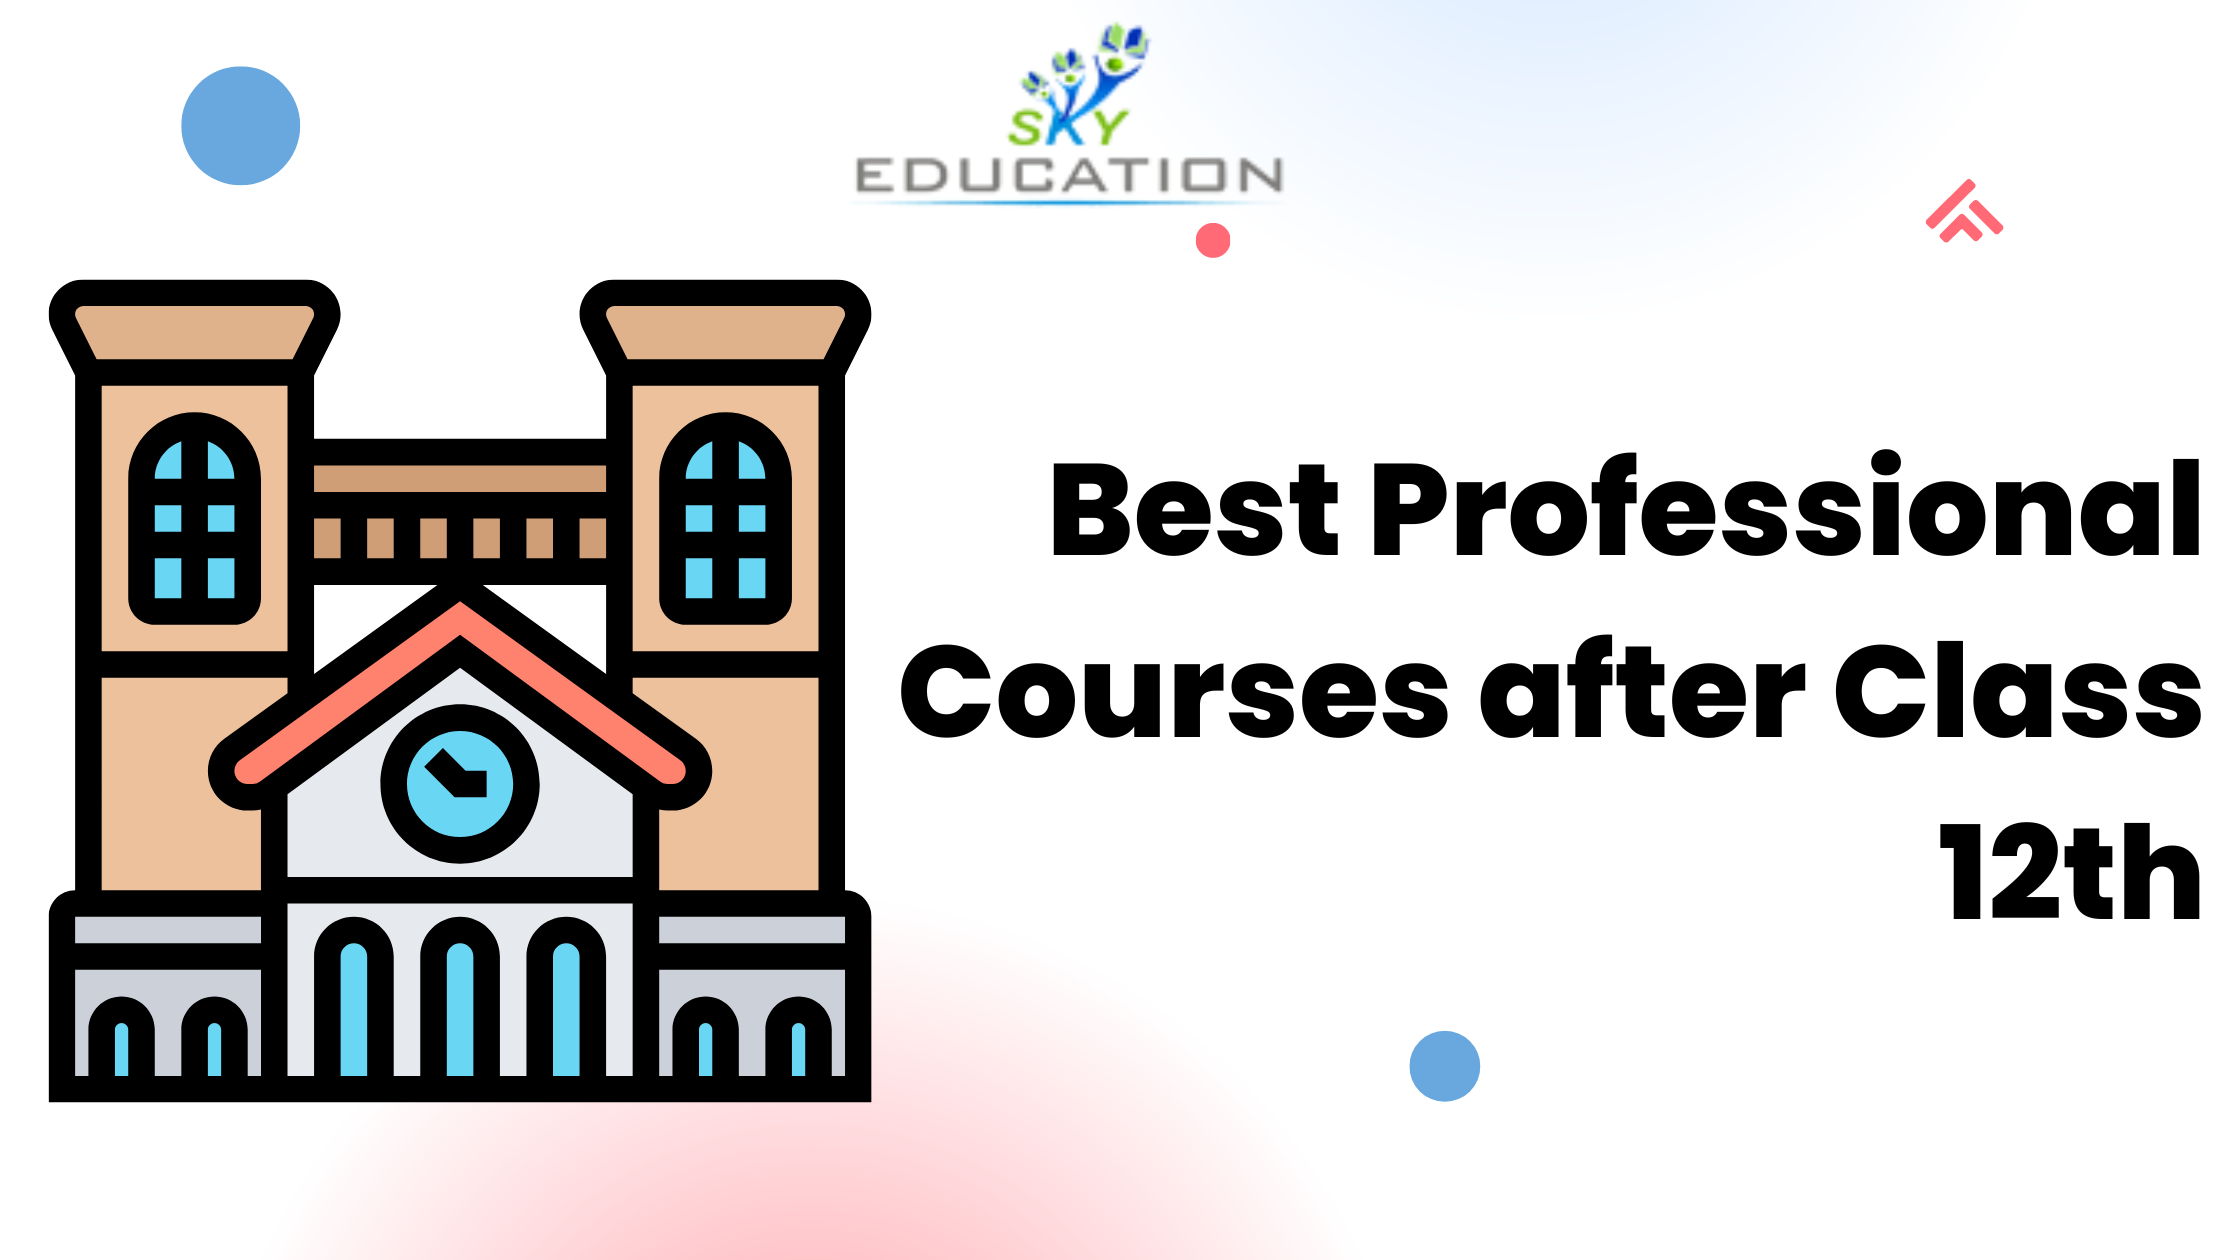 Exploring the Best Professional Courses after 12th 'photo